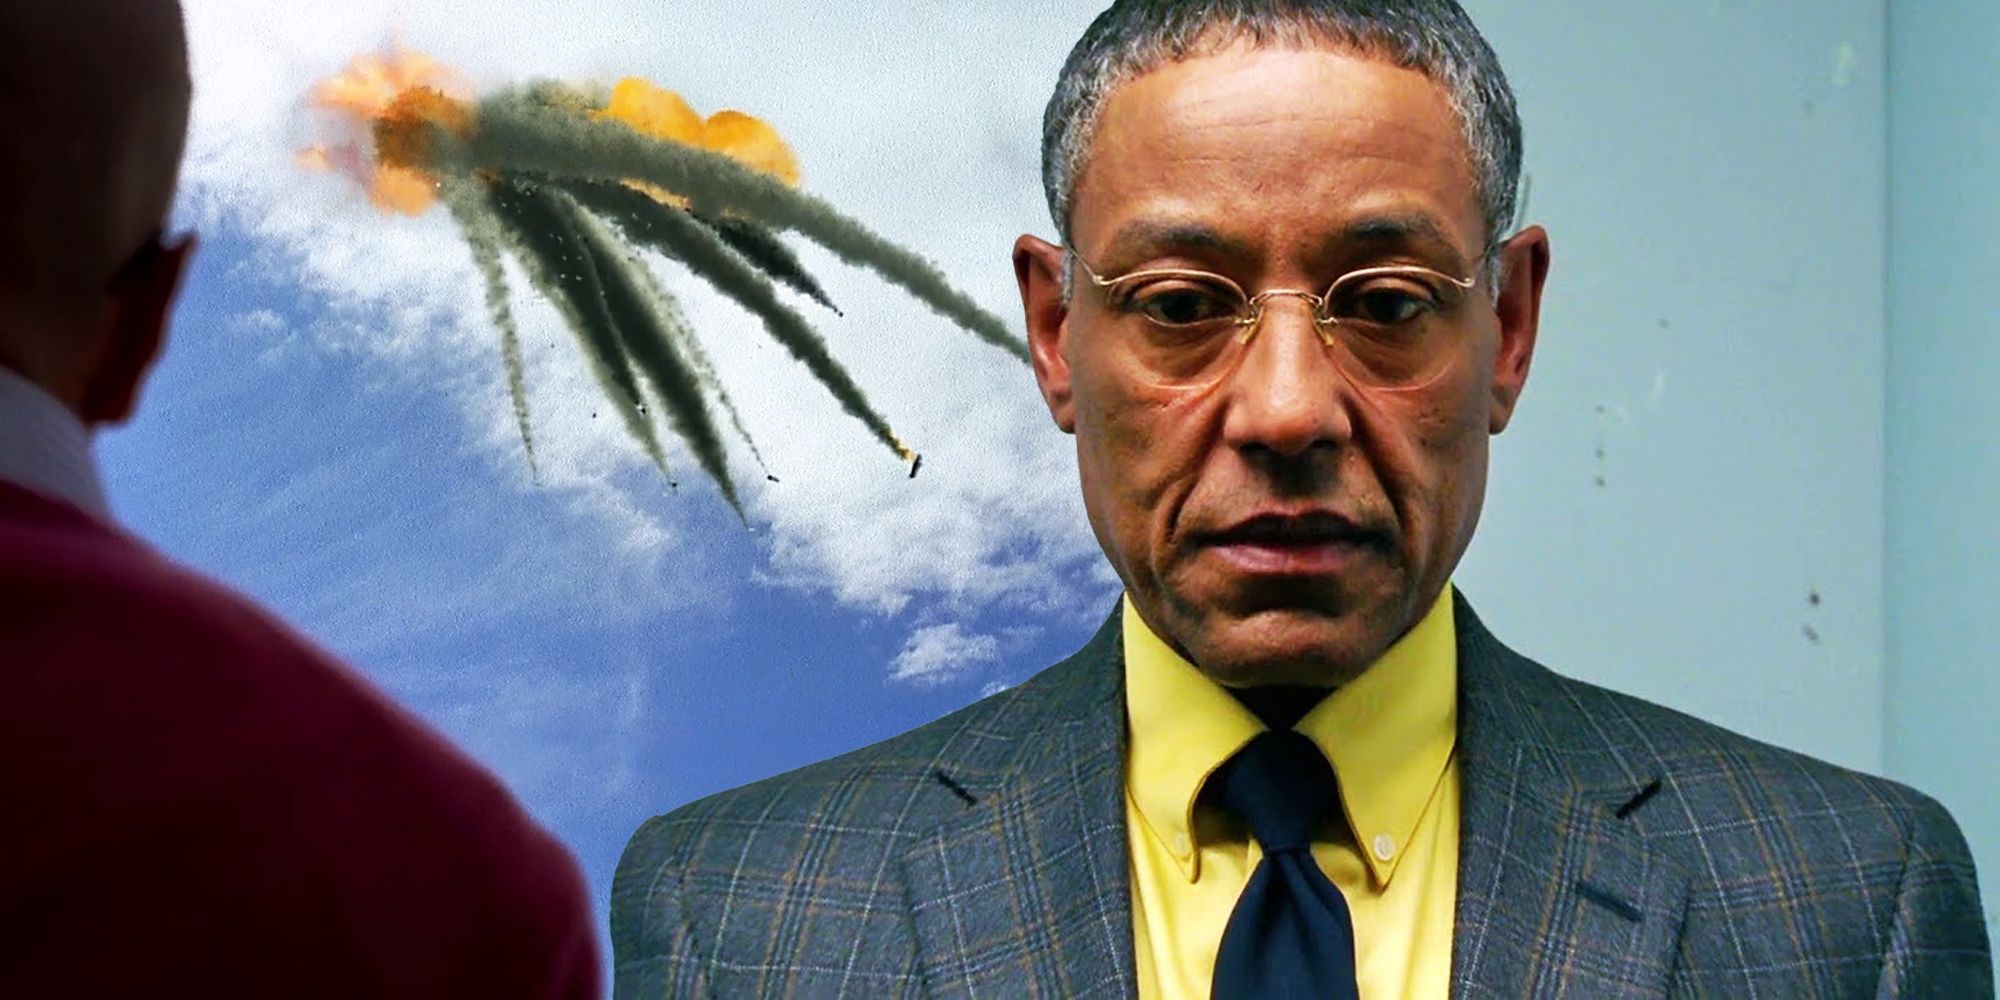 Gus Fring and Breaking Bad's plane crash